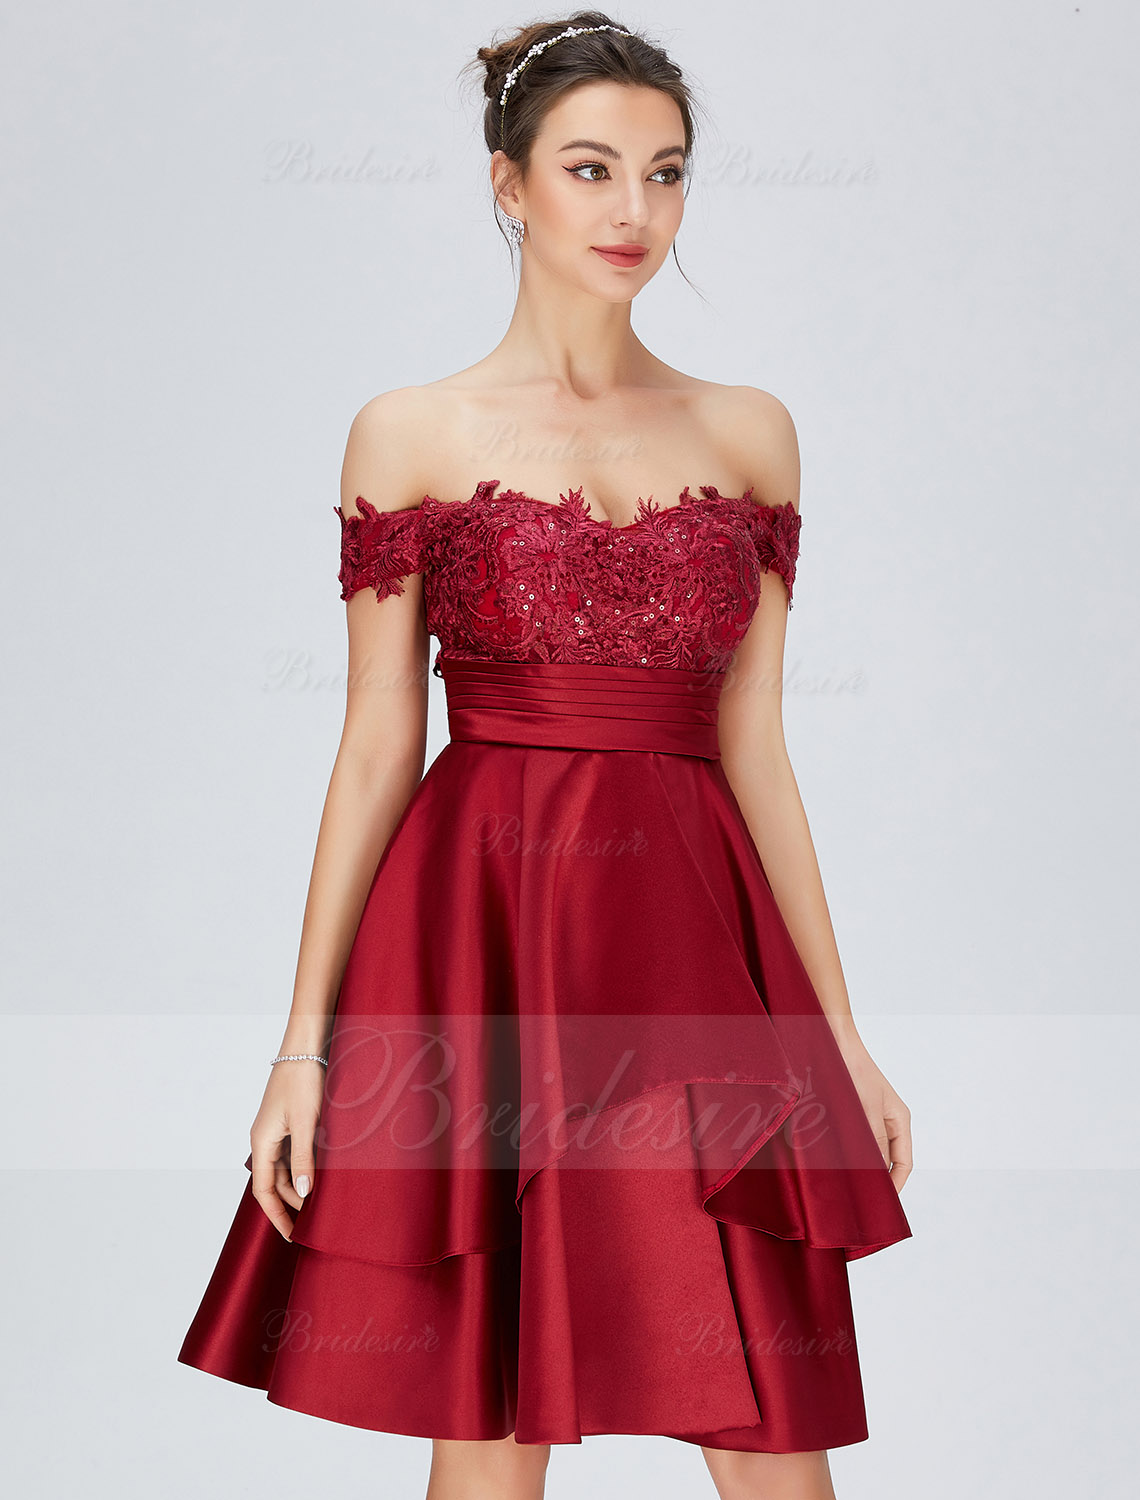 A-line Off-the-shoulder Knee-length Satin Homecoming Dress with Lace